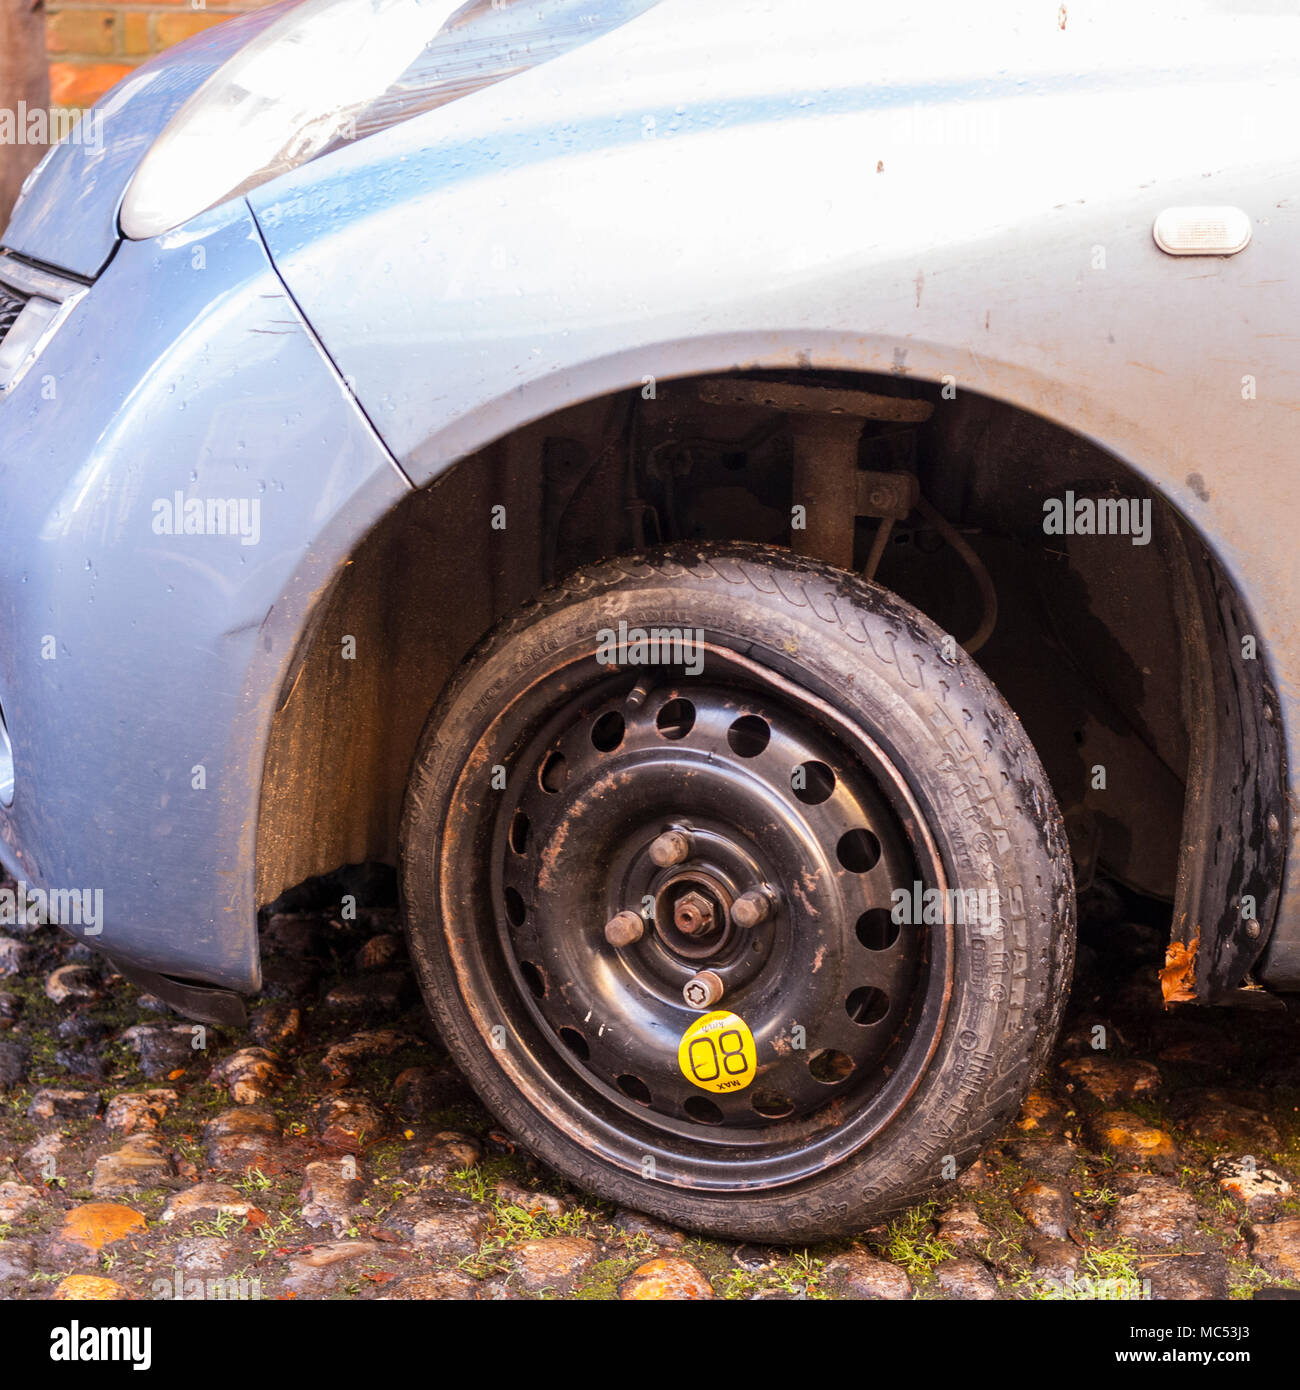 A cheapy skinny spare wheel fitted to a car Stock Photo